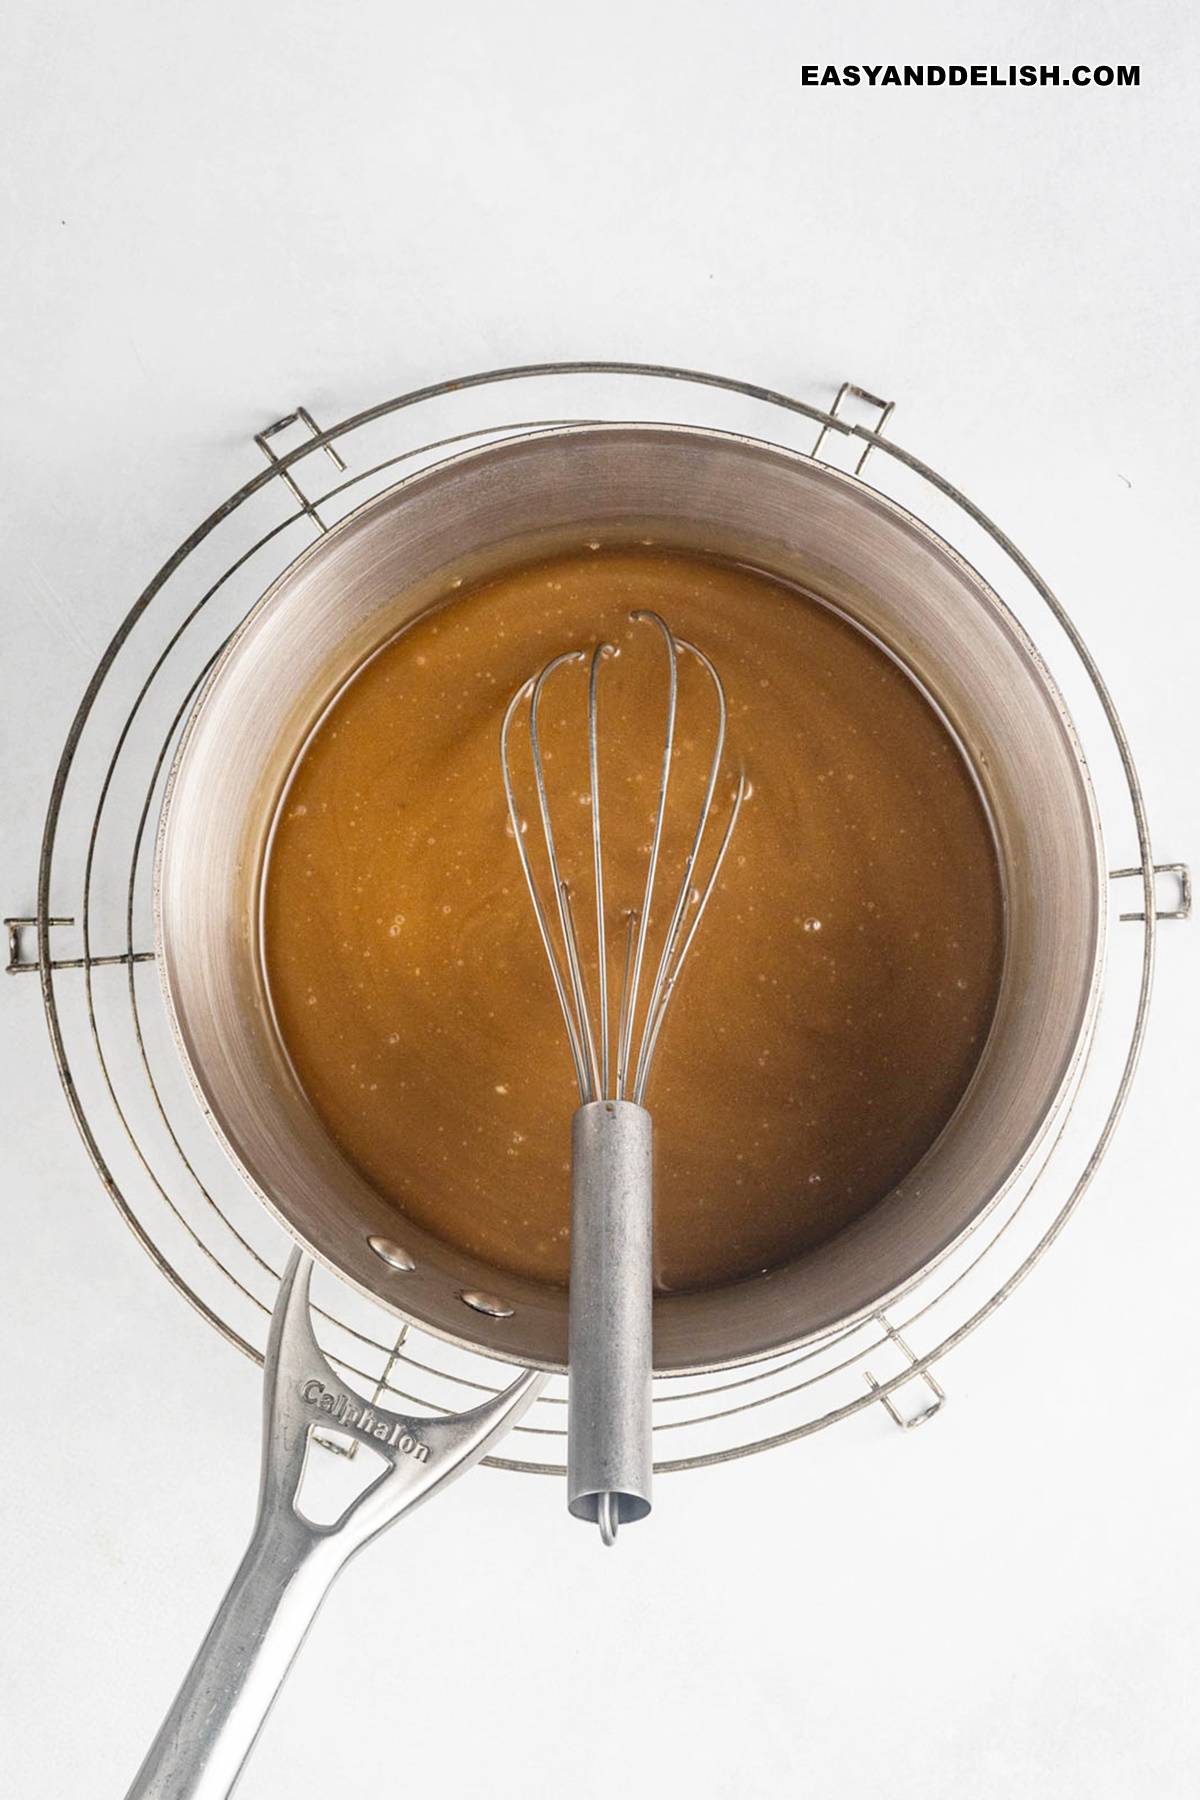 sauce mixture whisked in a saucepan.